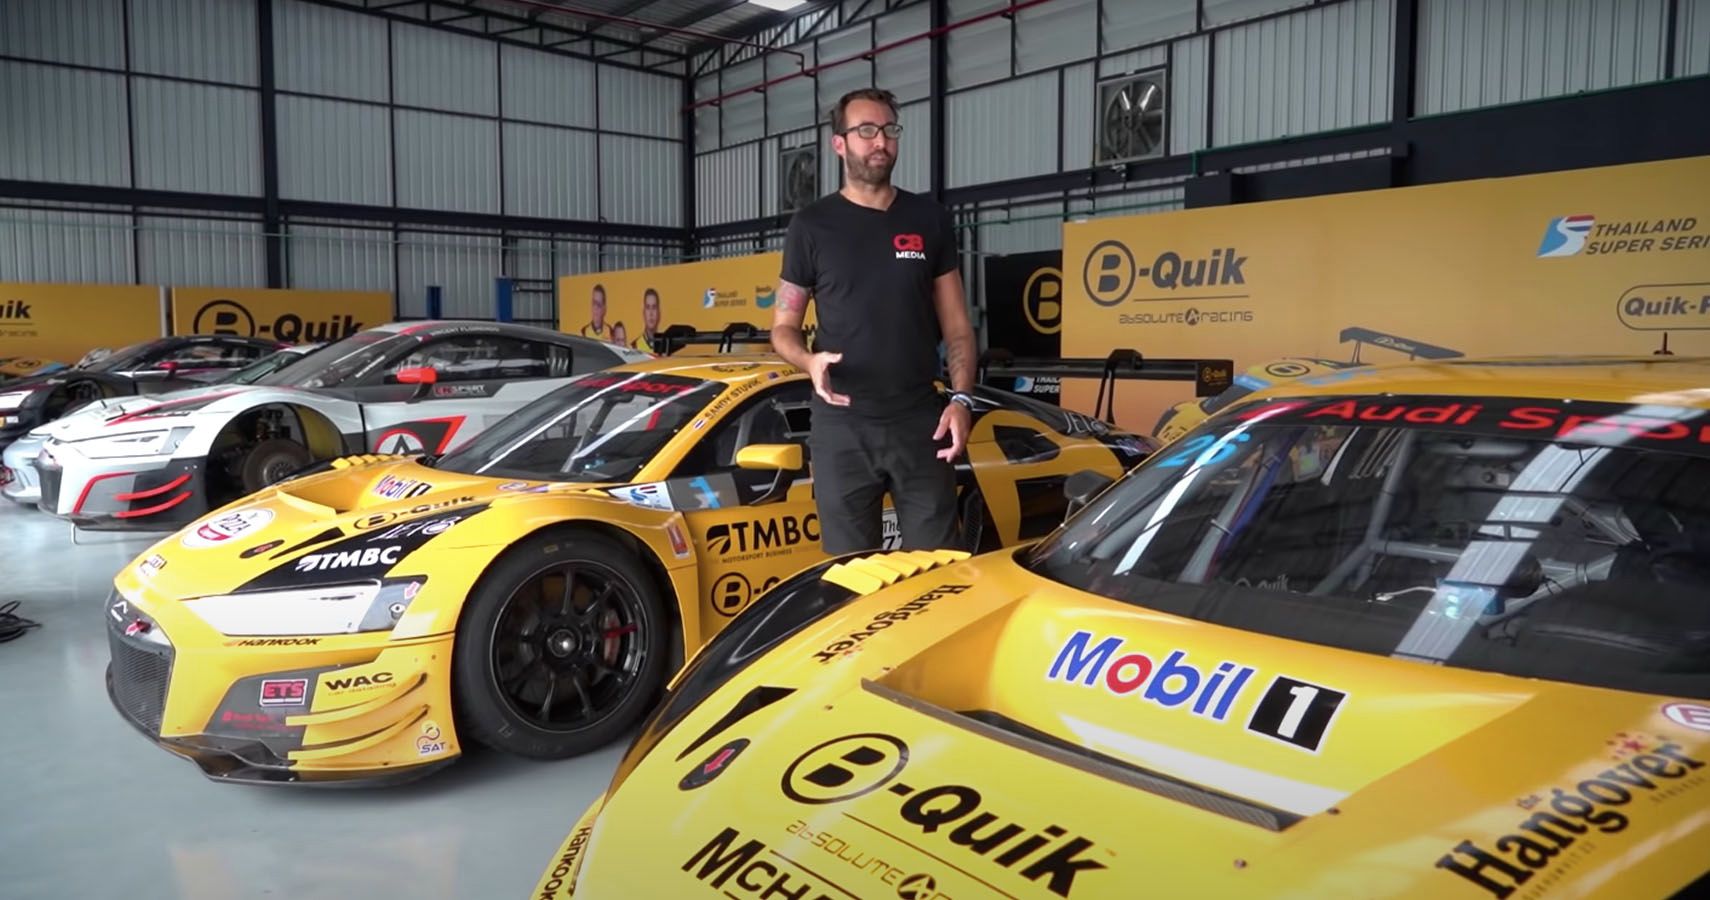 Check Out This Fleet Of Audi R8 Racers In Thailand